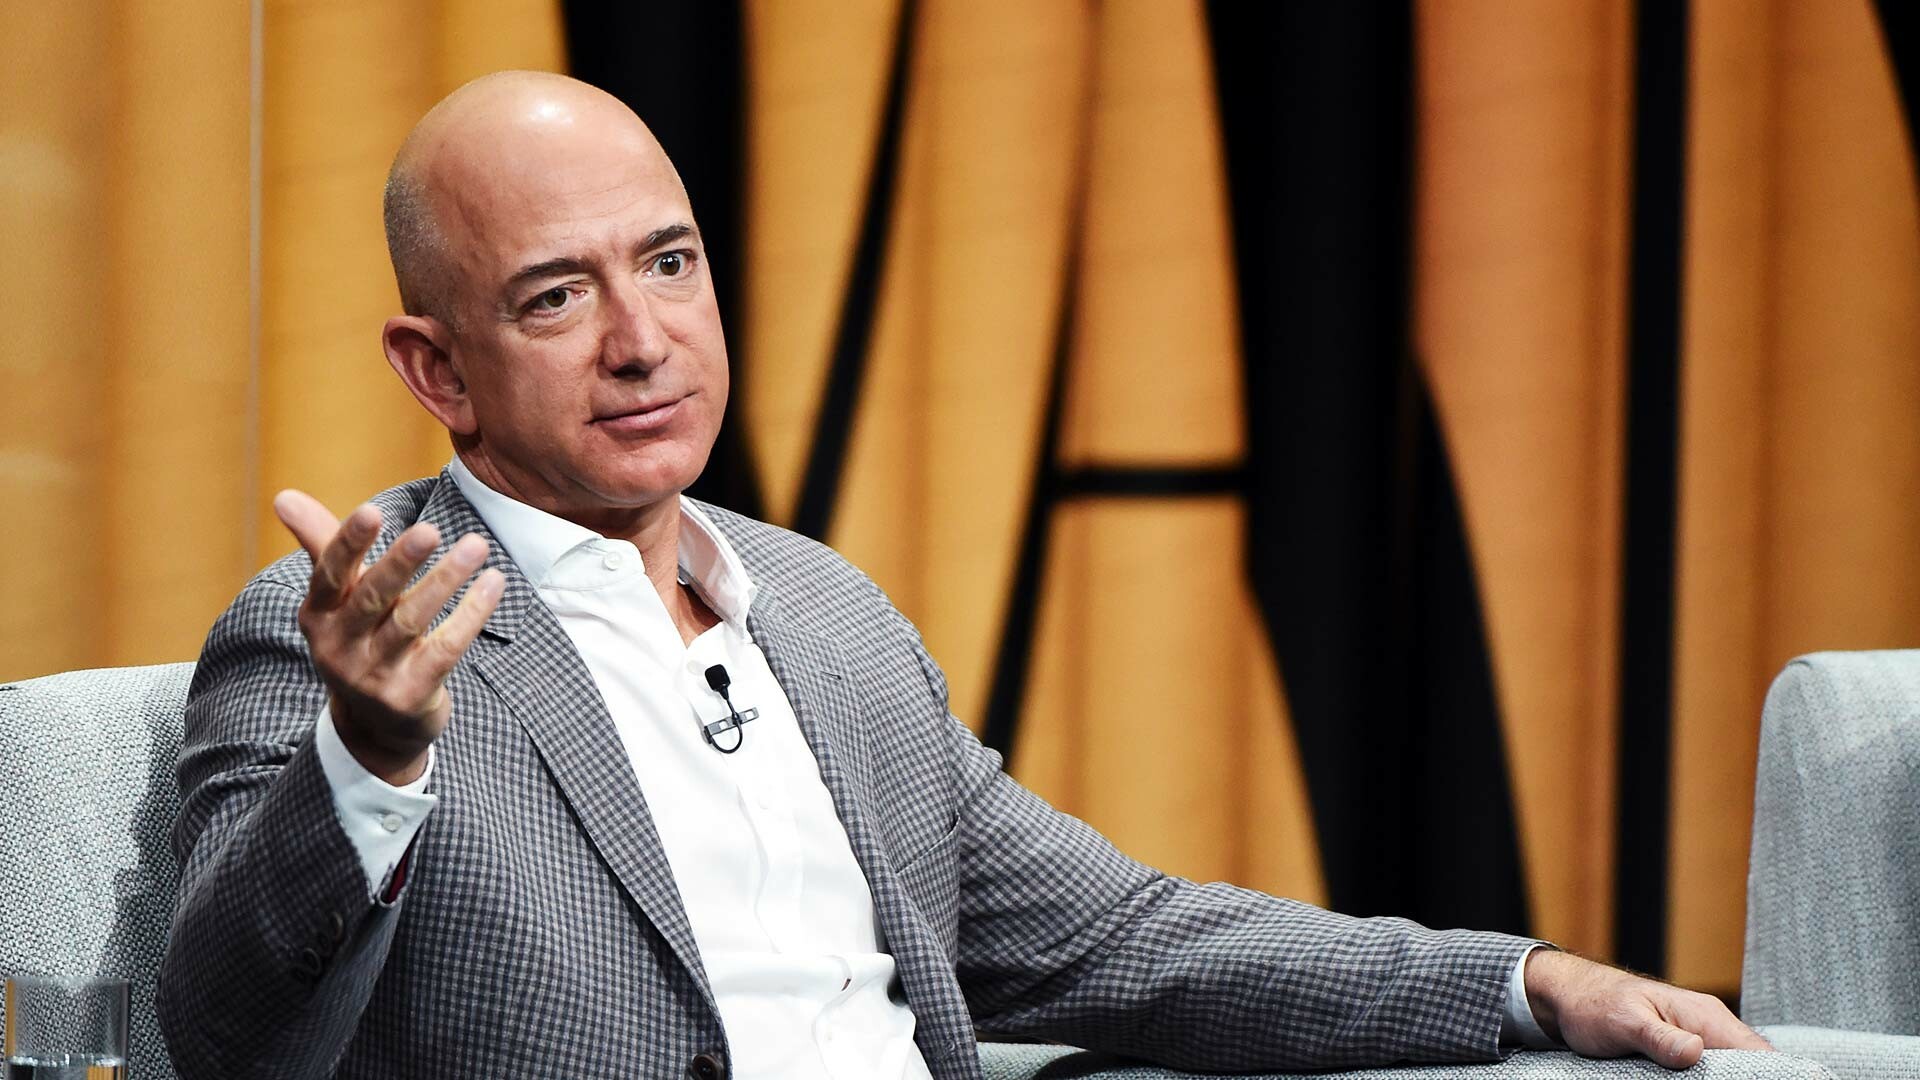 Jeff Bezos: World's richest man, An American entrepreneur, businessman, and the founder and chairman of Amazon. 1920x1080 Full HD Background.